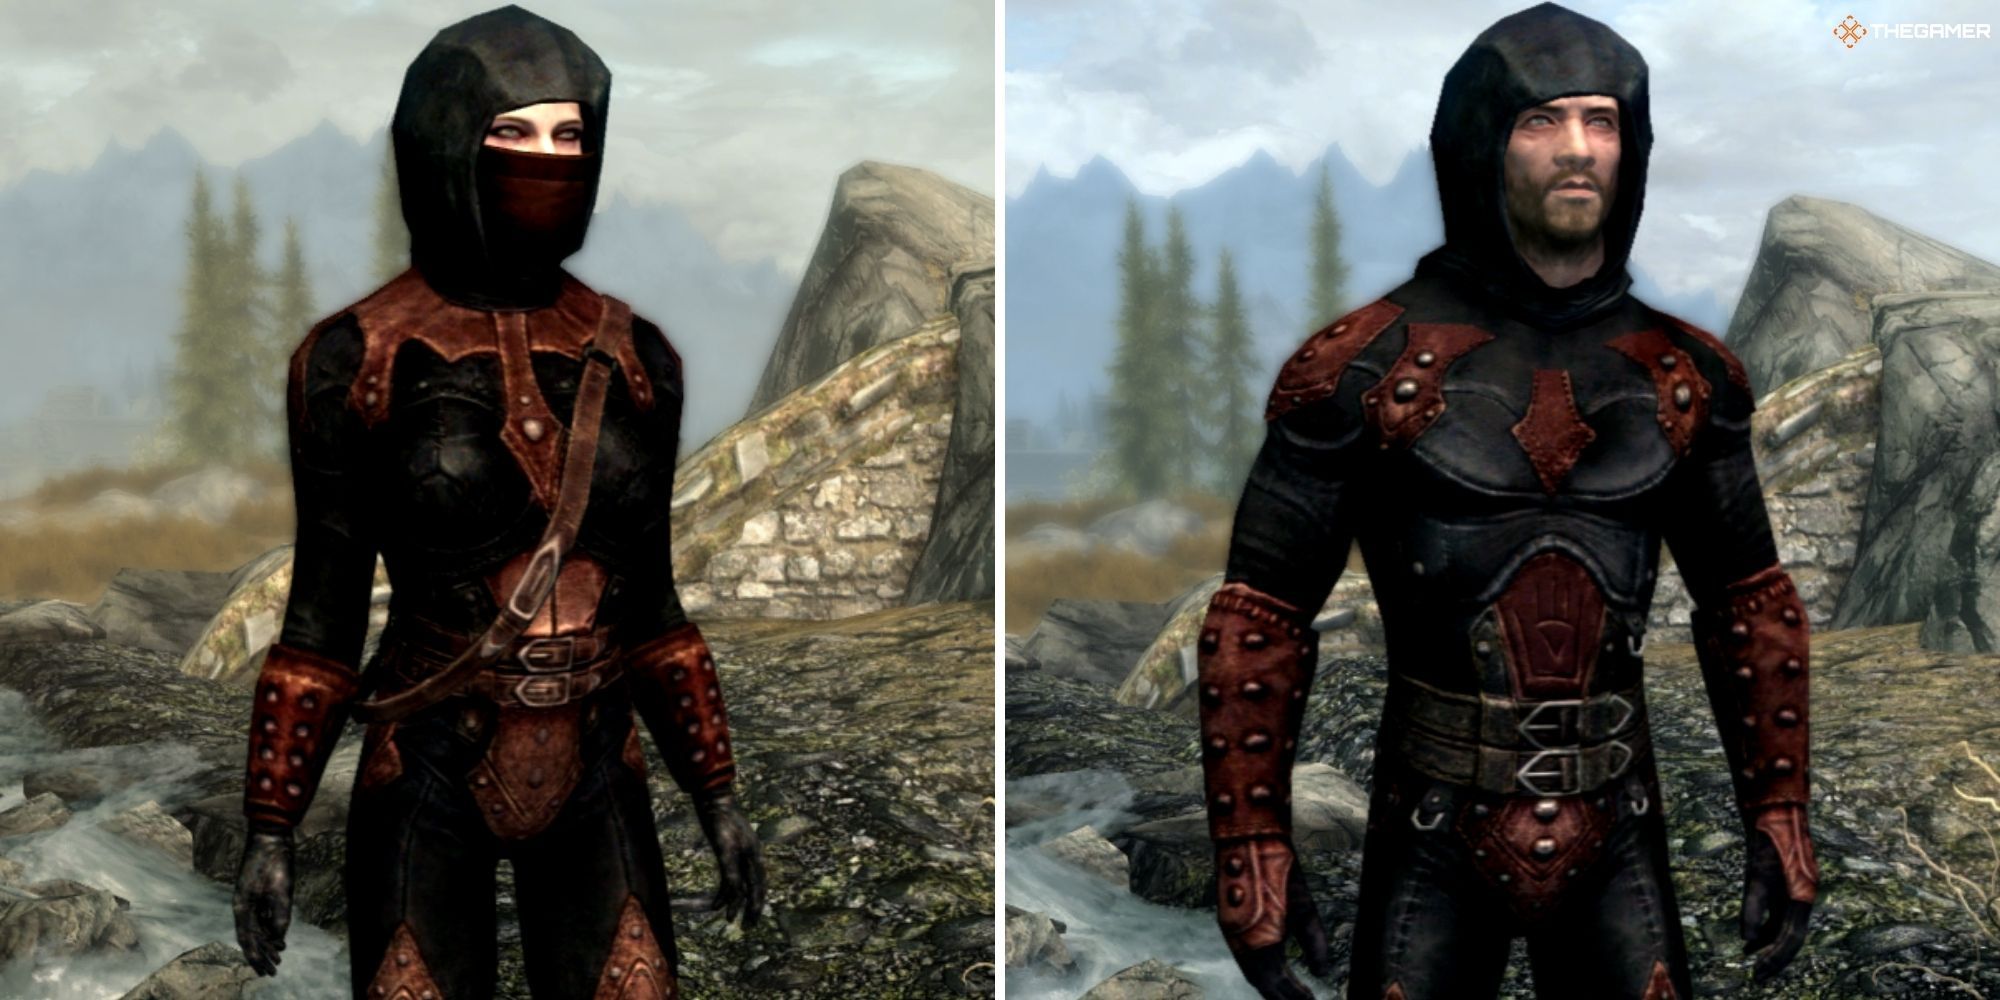 Skyrim - Ancient Shrouded Armor worn by the player, split image